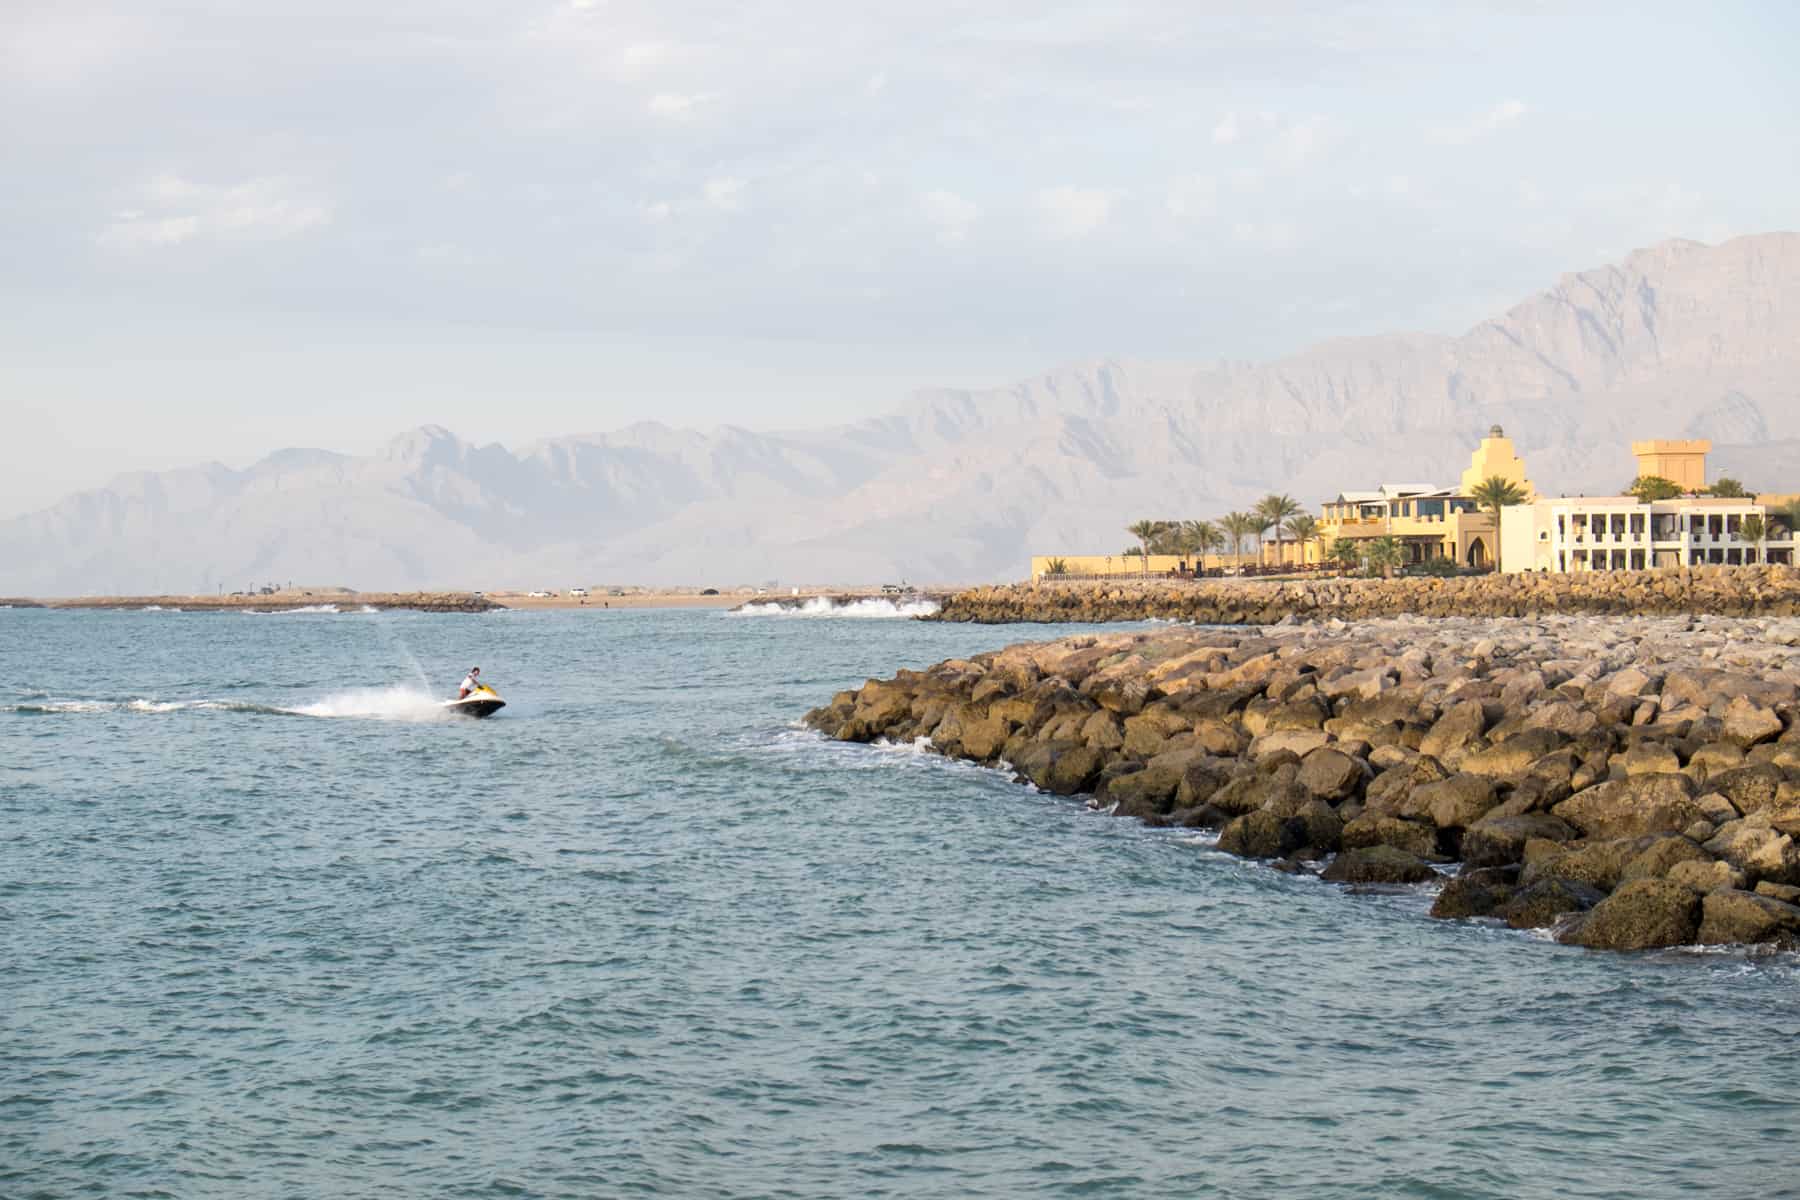 A man on a jetski on grey-blue waters ride close to a rocky wall on a coastline backed by a golden yellow resort and brown mountains